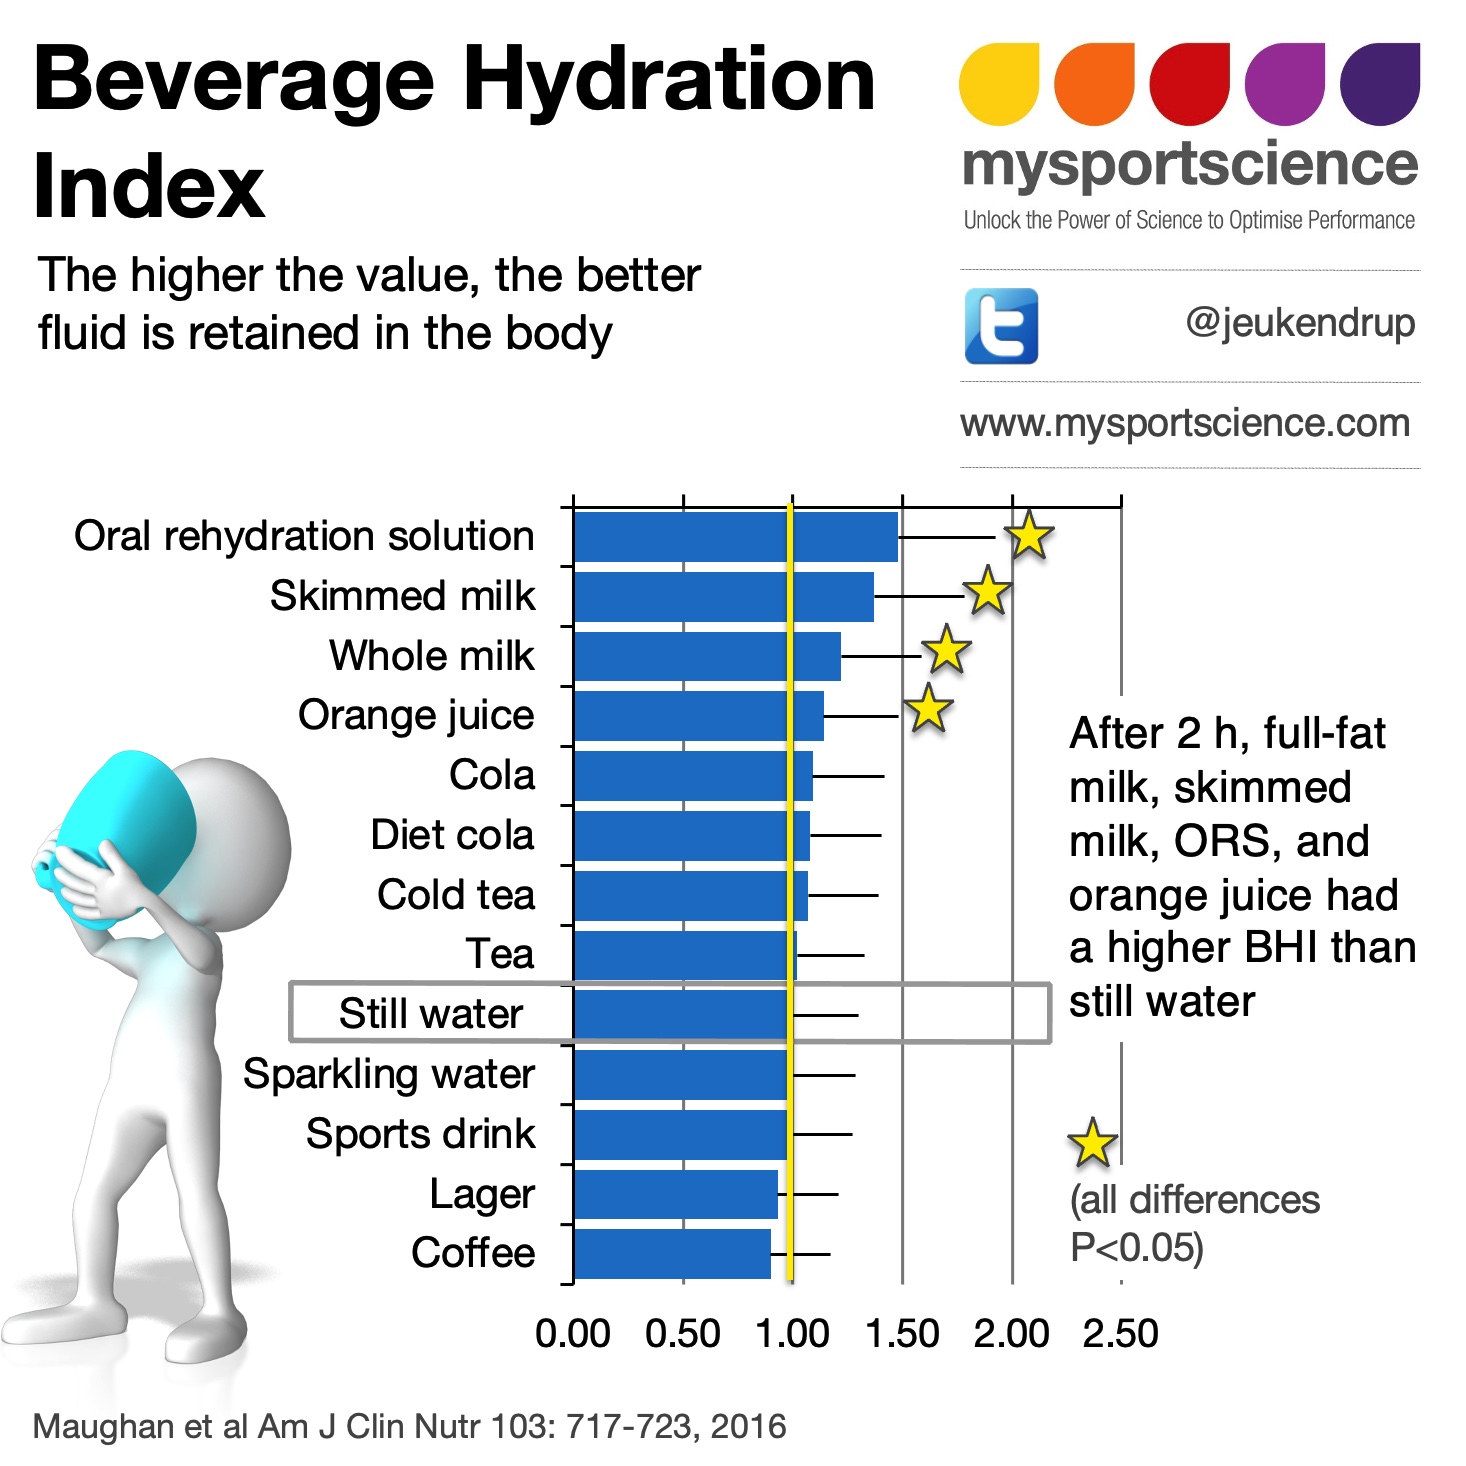 Asker Jeukendrup on X: The beverage hydration index is a measure for how  well the body retains fluid after exercise with different beverages. Some  surprises?? Read the blog on    /